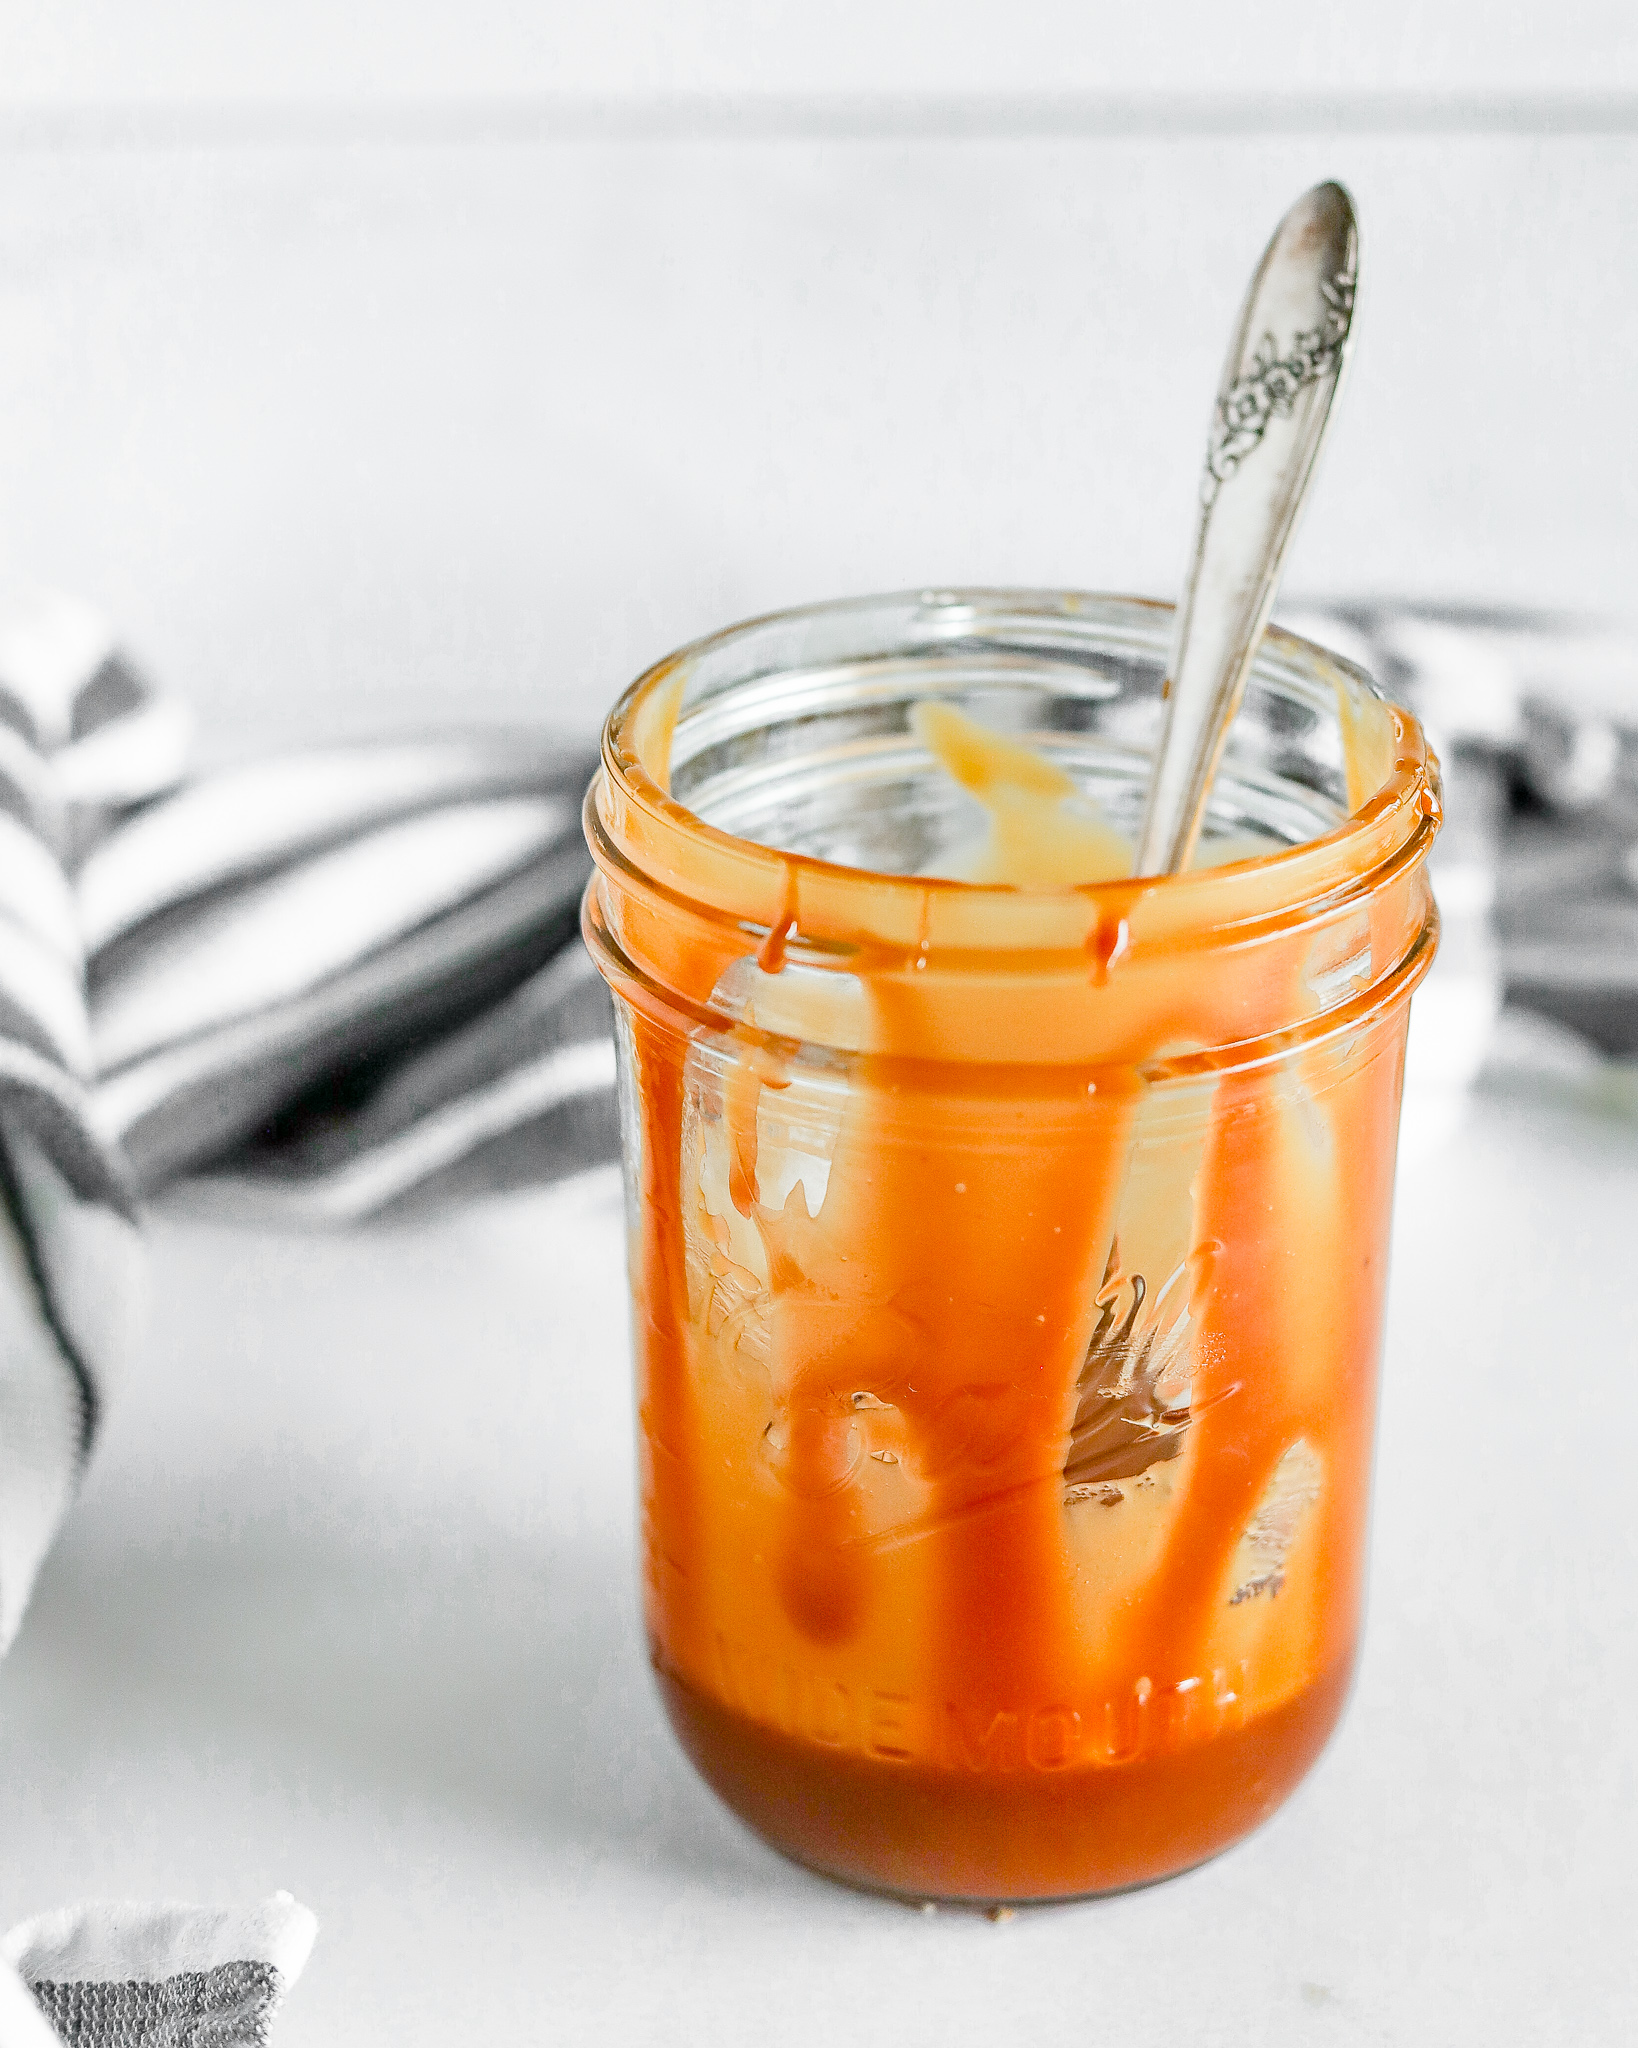 ball jar of caramel with a vintage spoon inside and caramel dripping down the jar